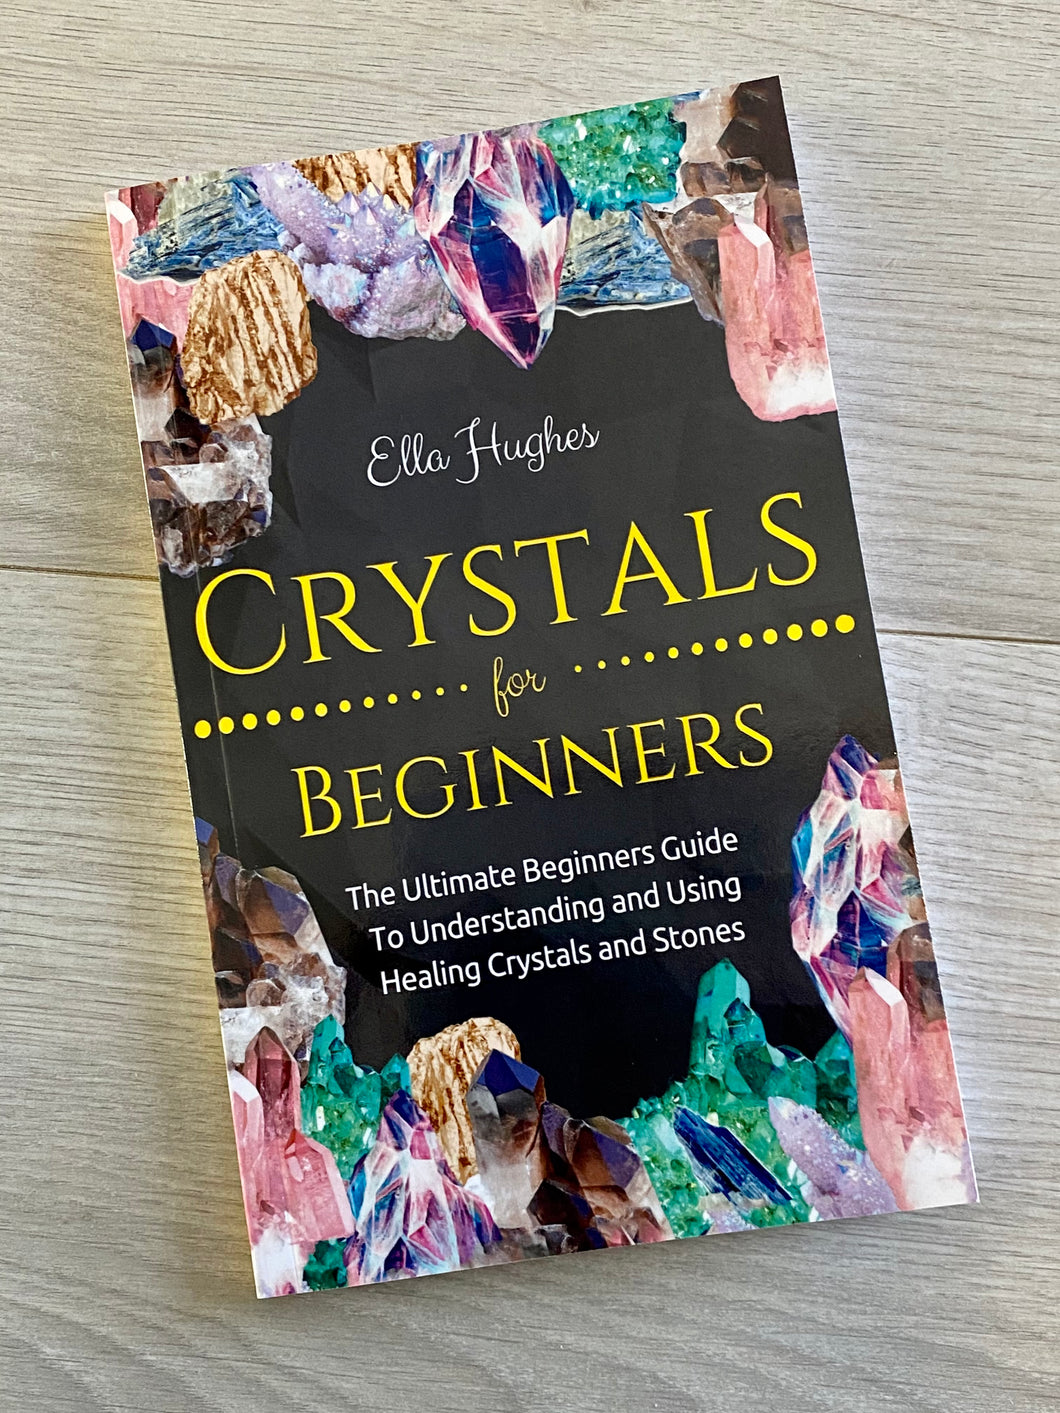 Crystals for Beginners Book